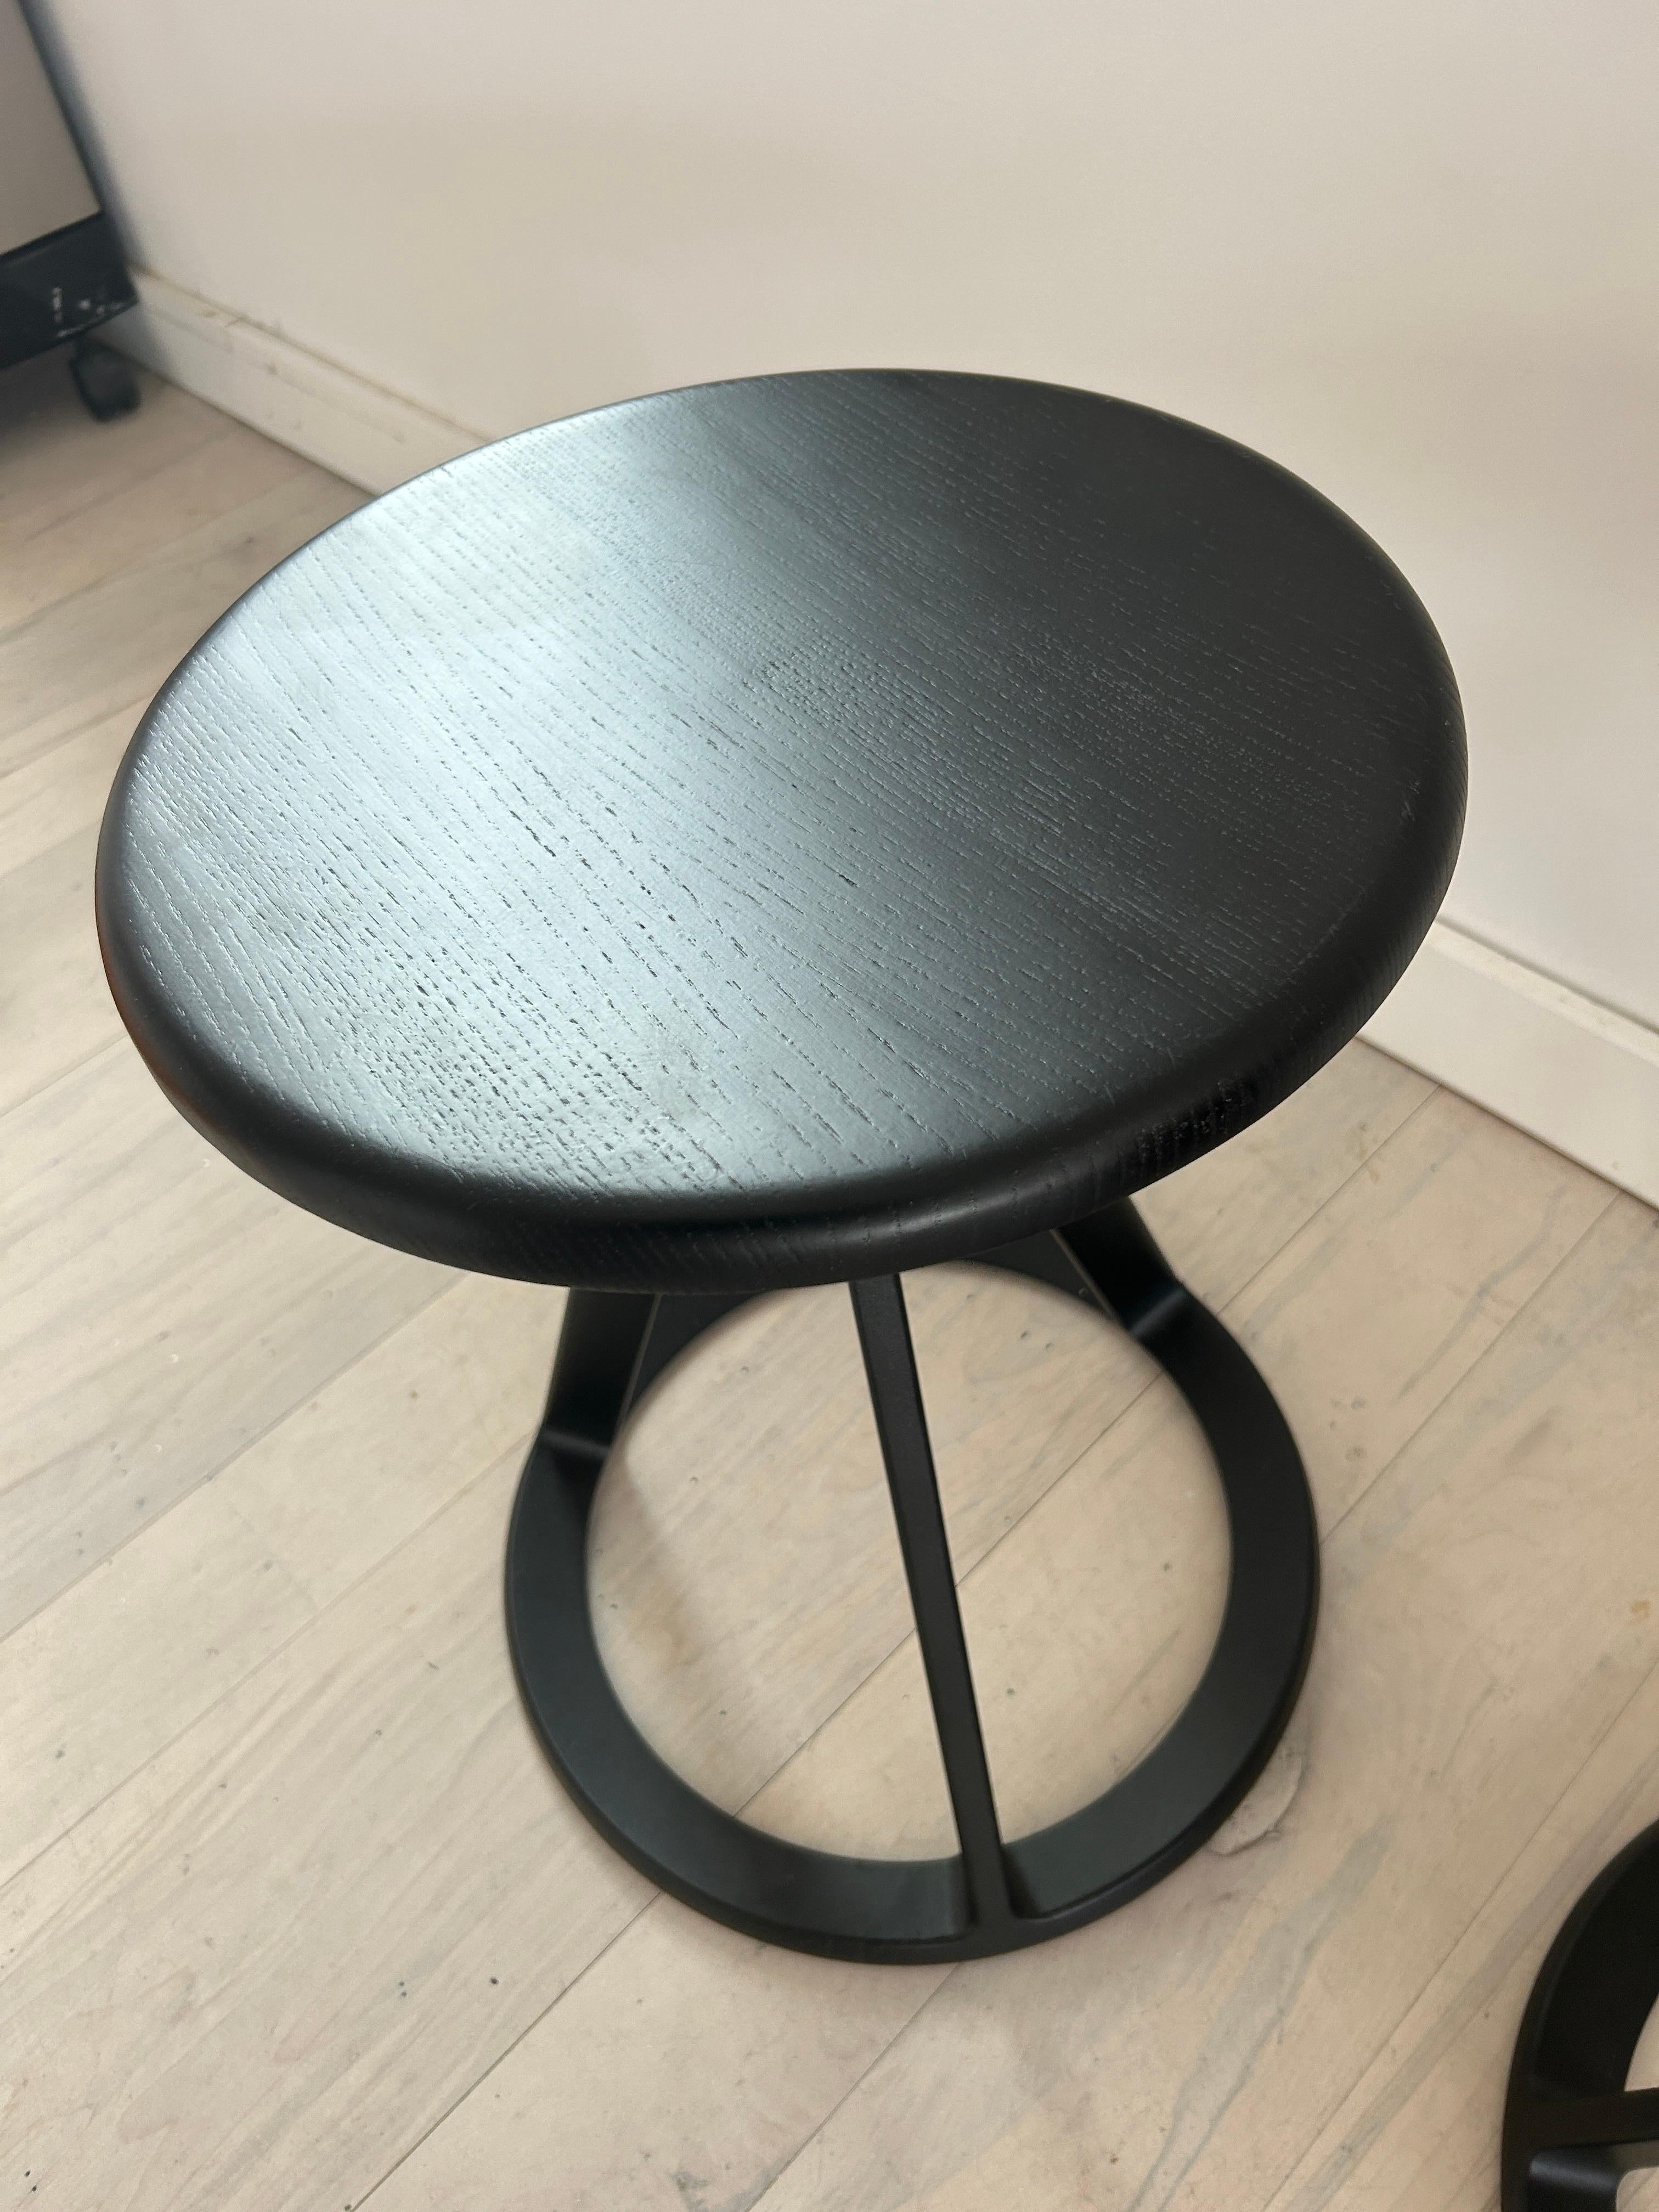 Pair of Modern Edward Barber and Jay Osgerby for Knoll Piton Stools Black In Good Condition For Sale In BROOKLYN, NY